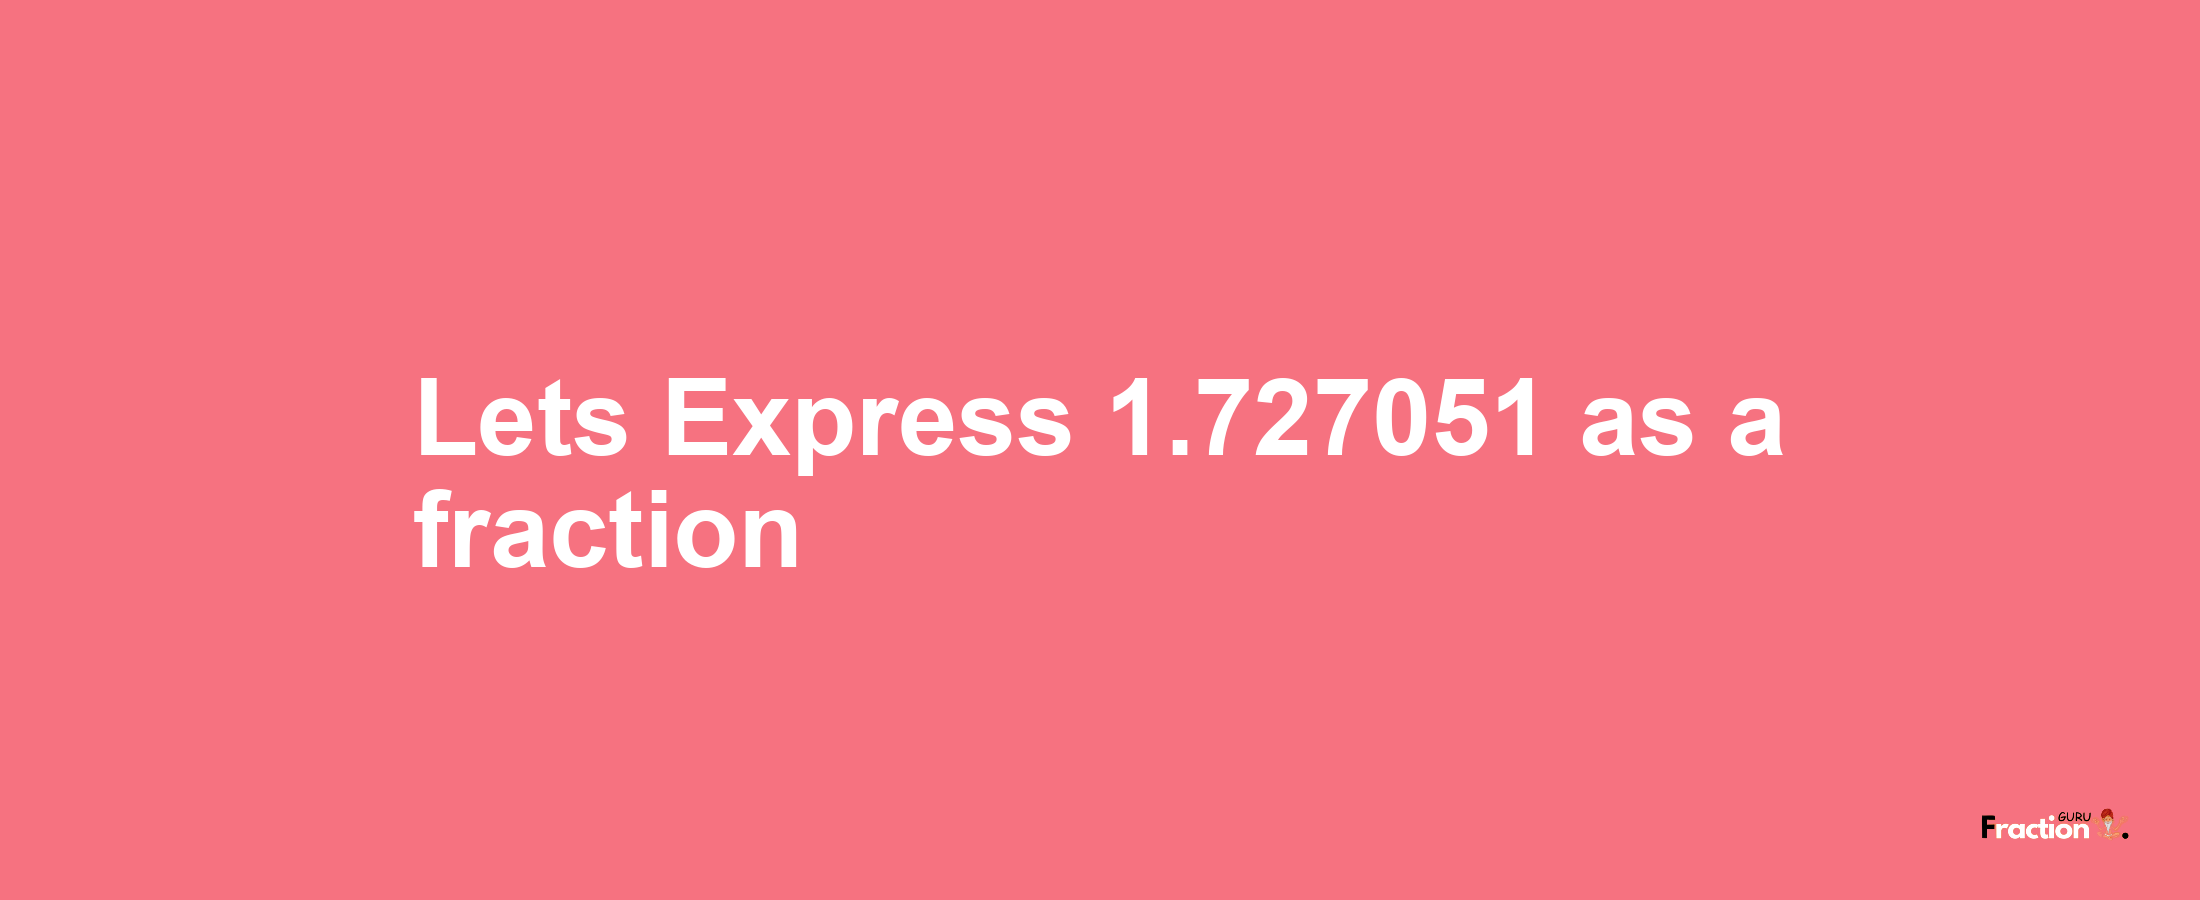 Lets Express 1.727051 as afraction